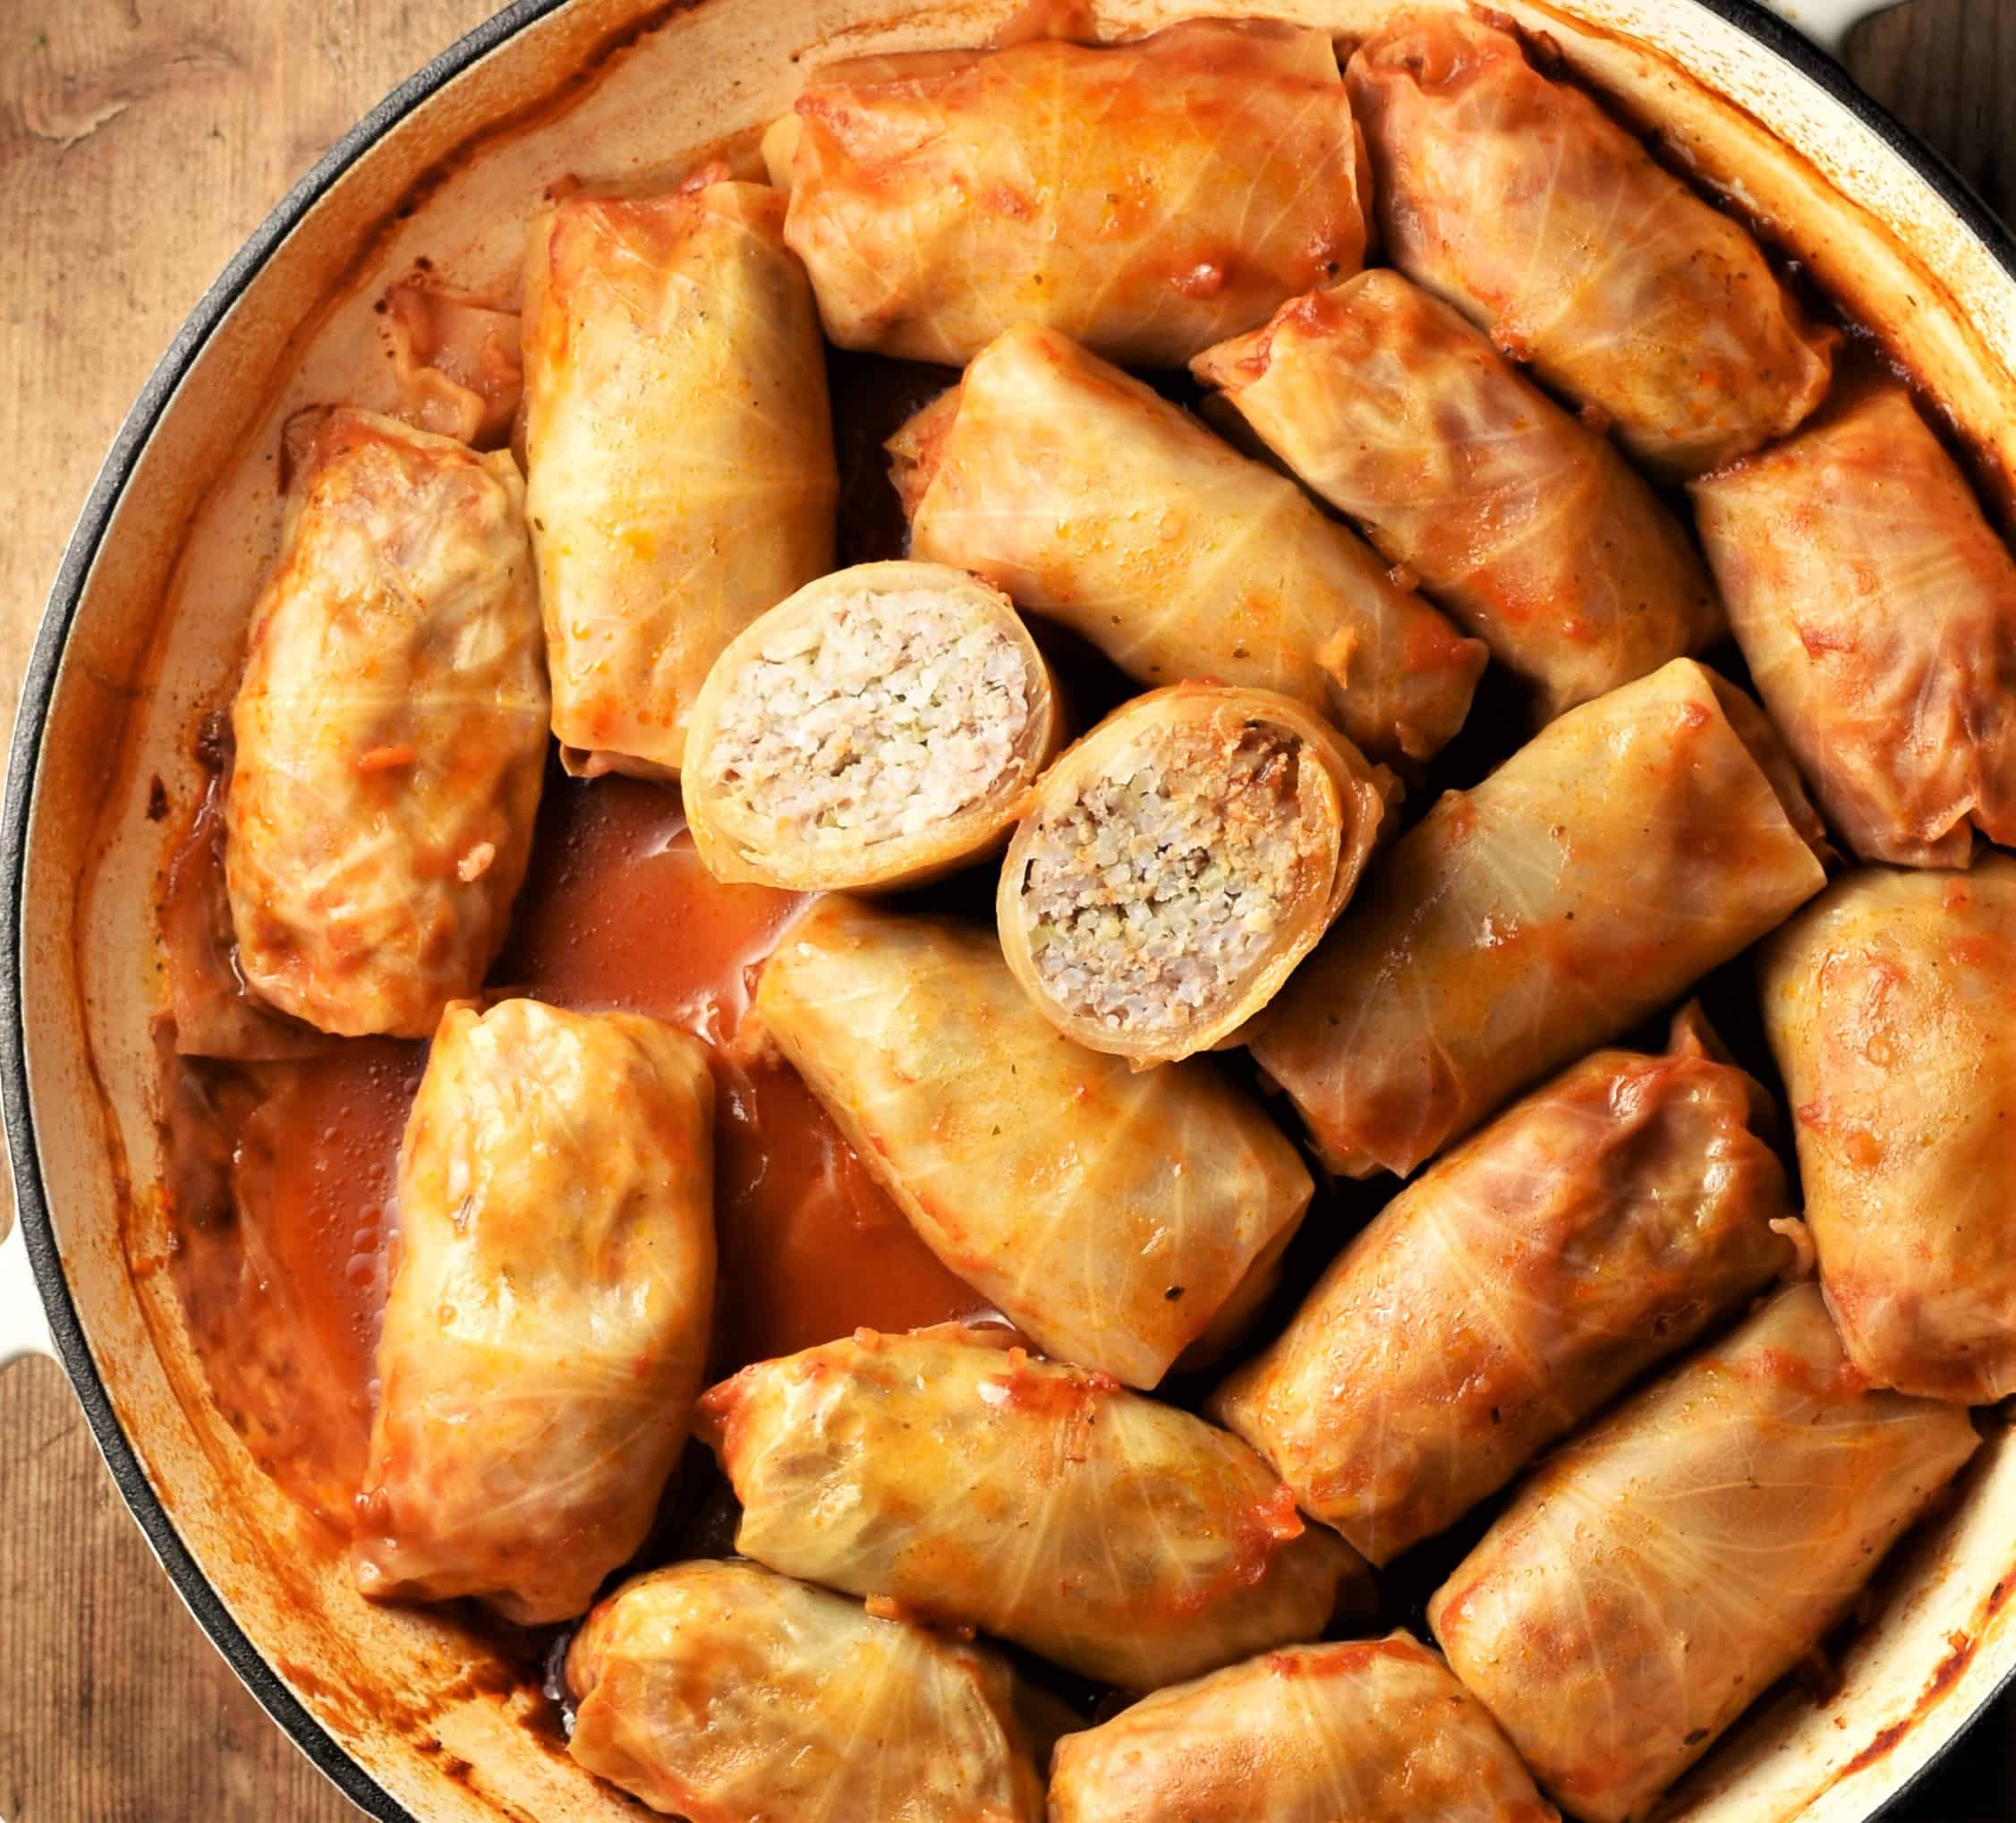 Top down view of cabbage rolls in tomato sauce in large white shallow pan.